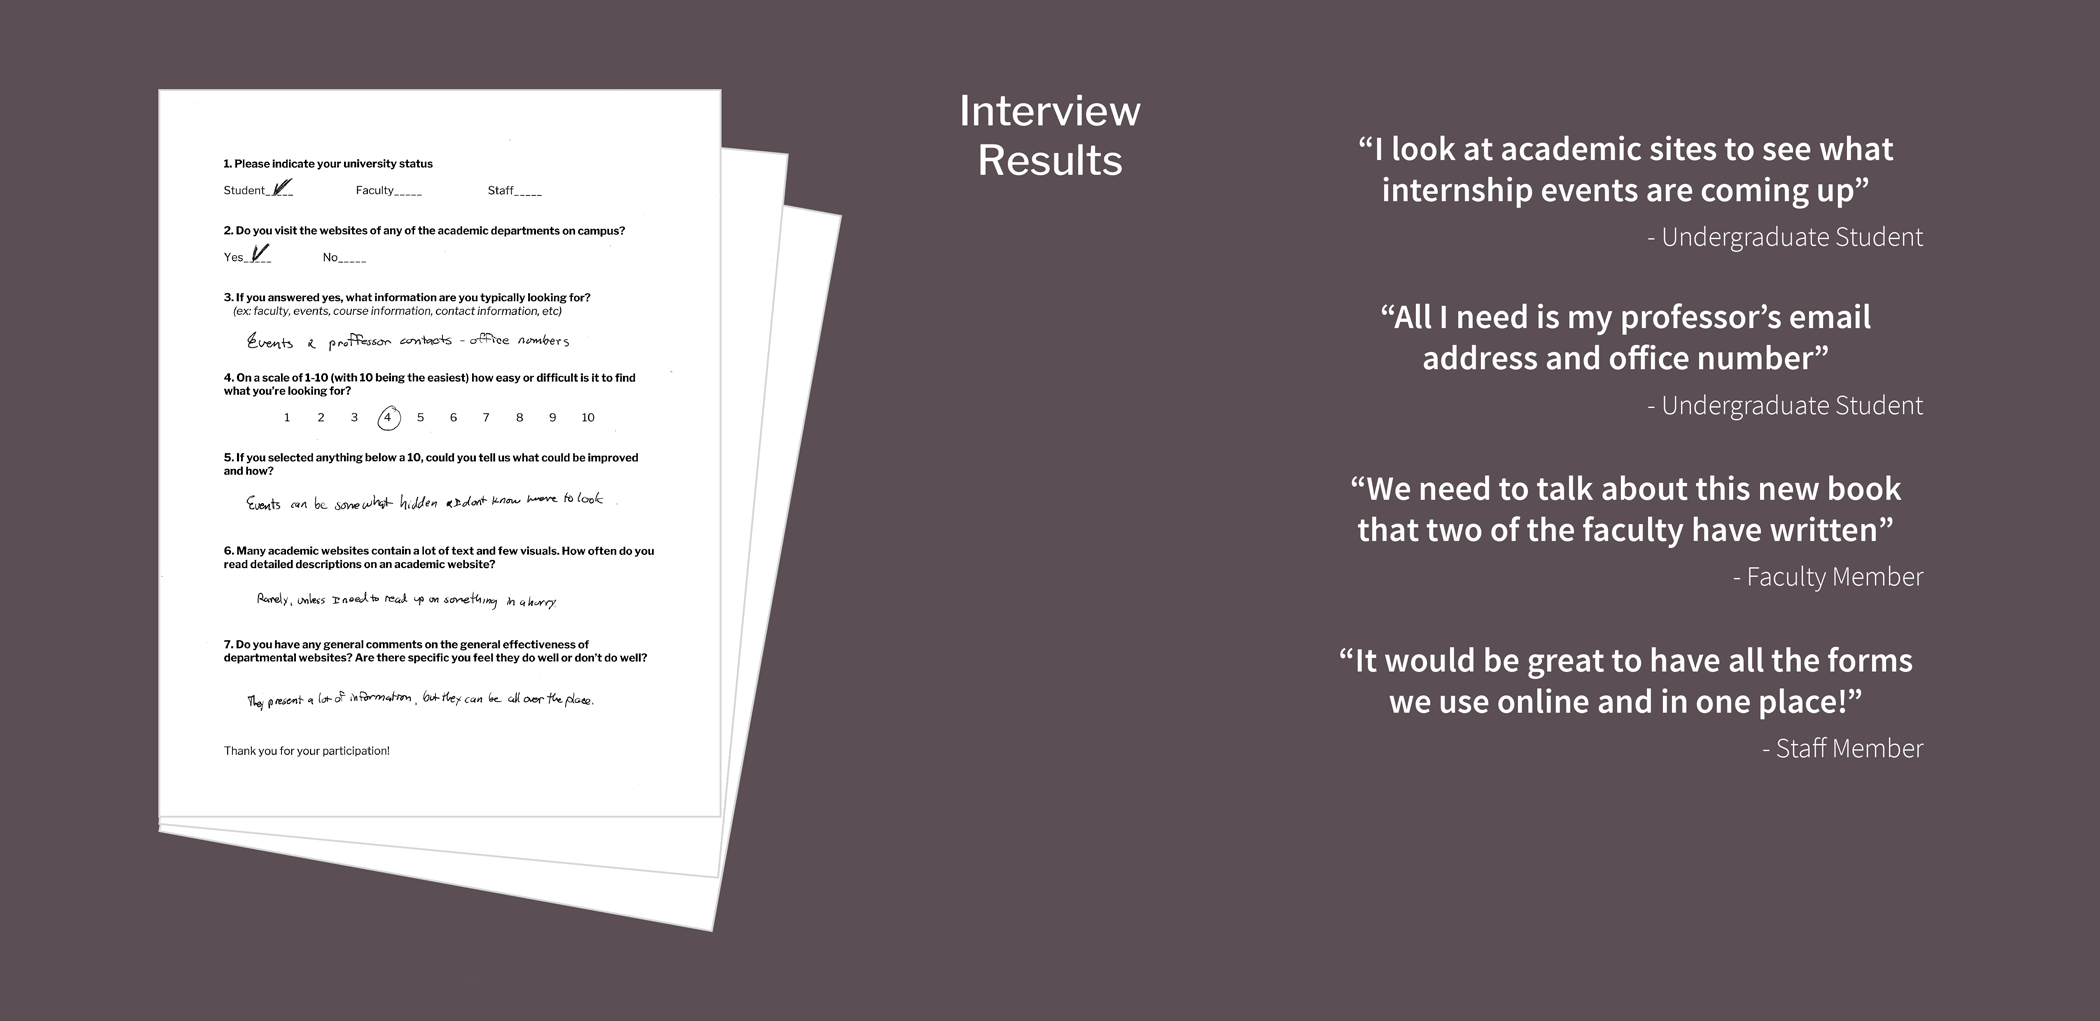 Interview Results